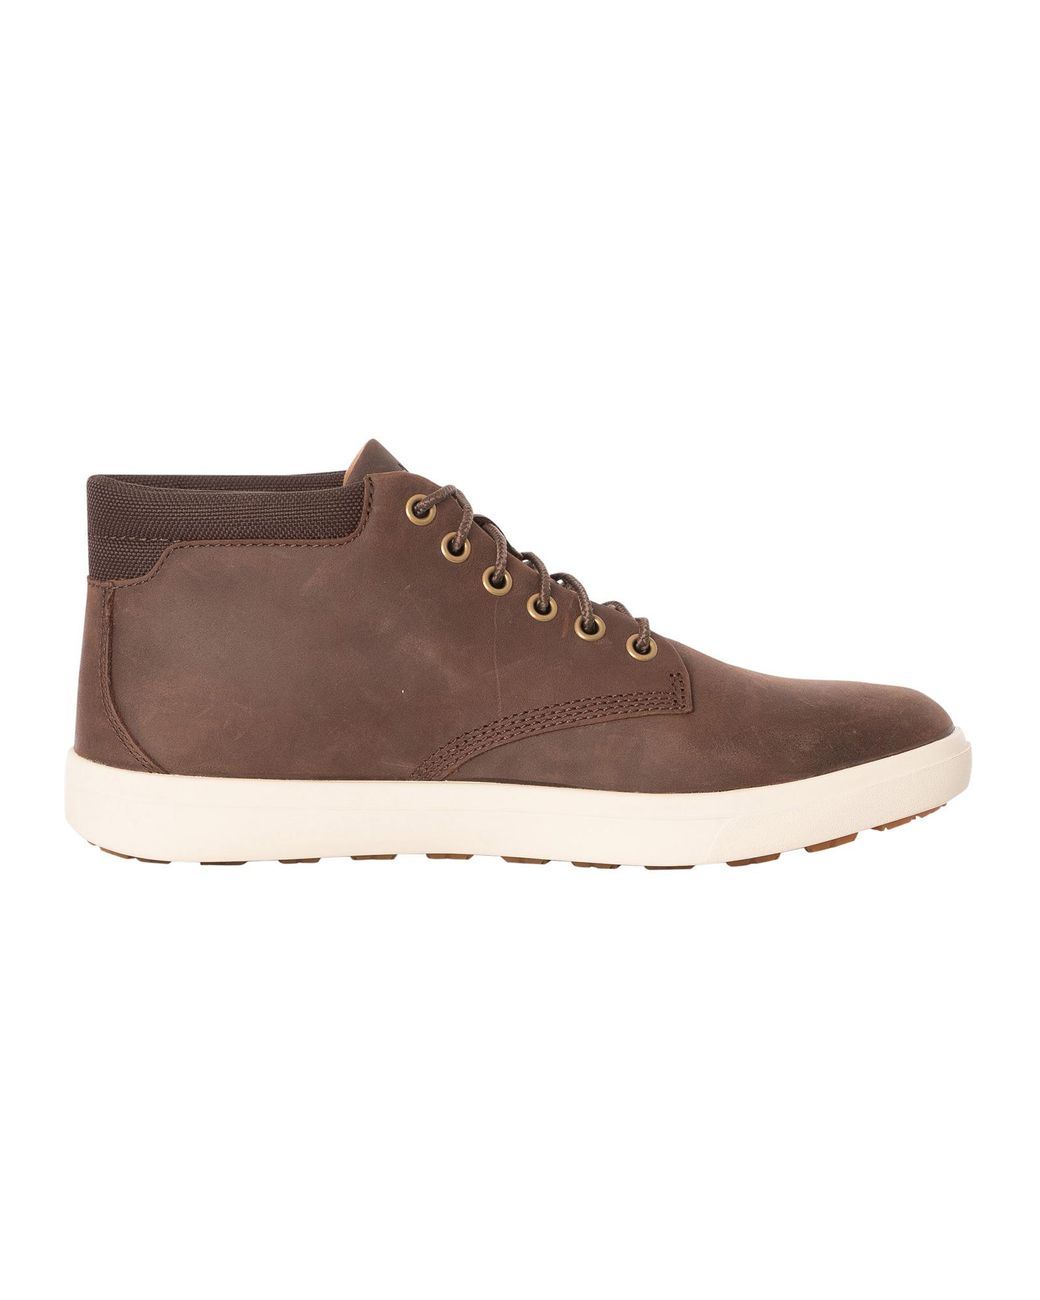 Timberland Ashwood Park Chukka Boots in Brown for Men | Lyst